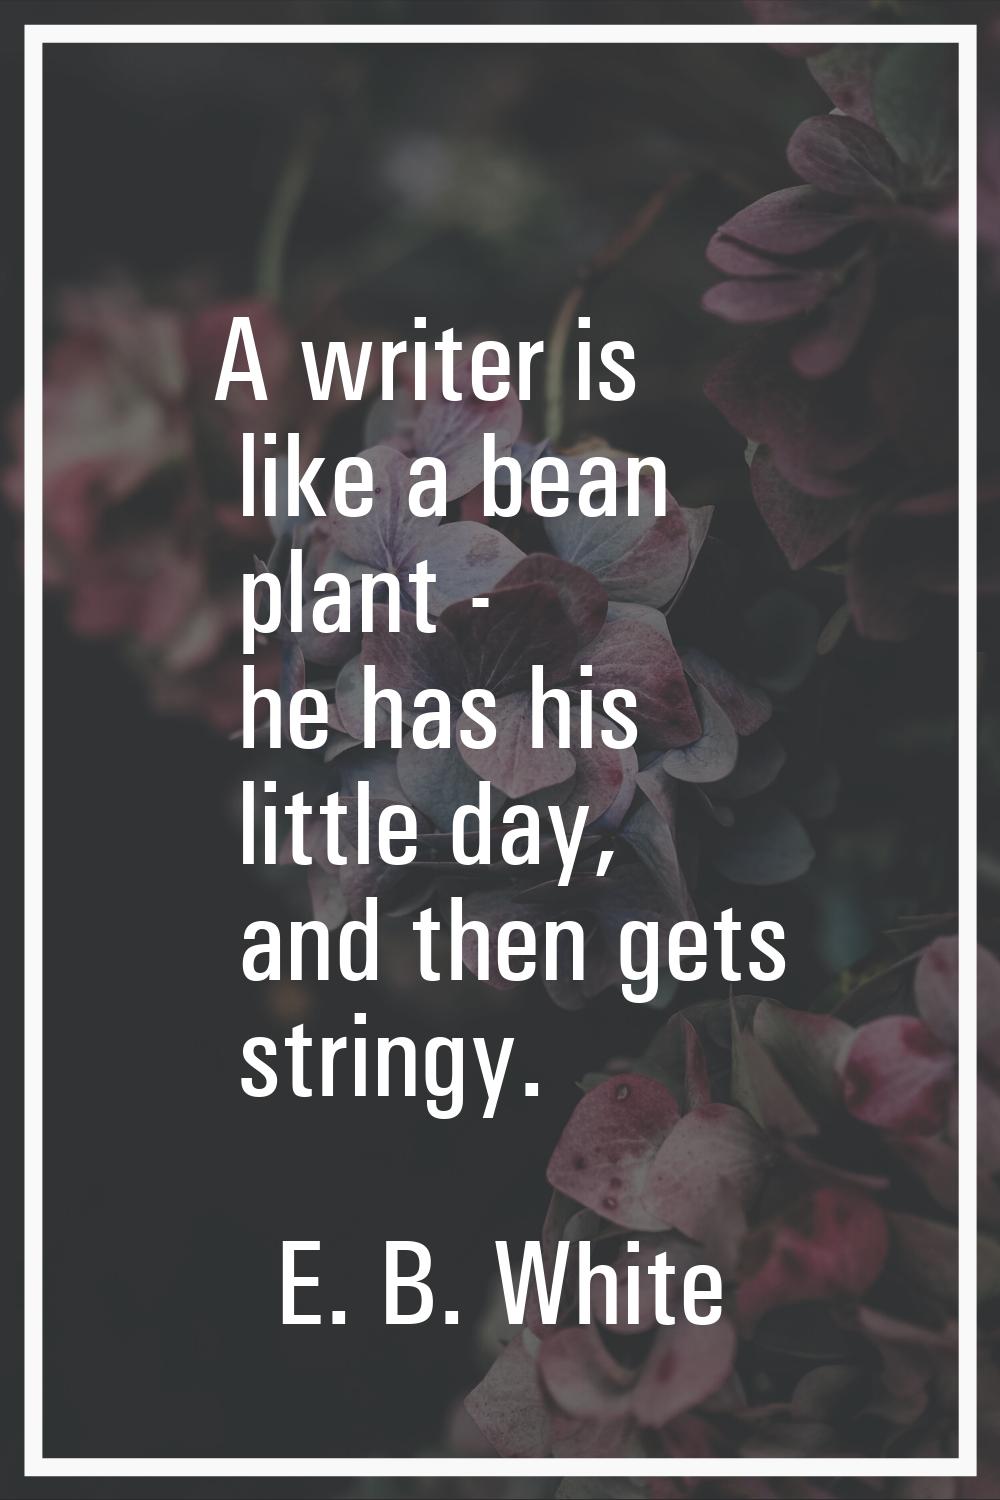 A writer is like a bean plant - he has his little day, and then gets stringy.